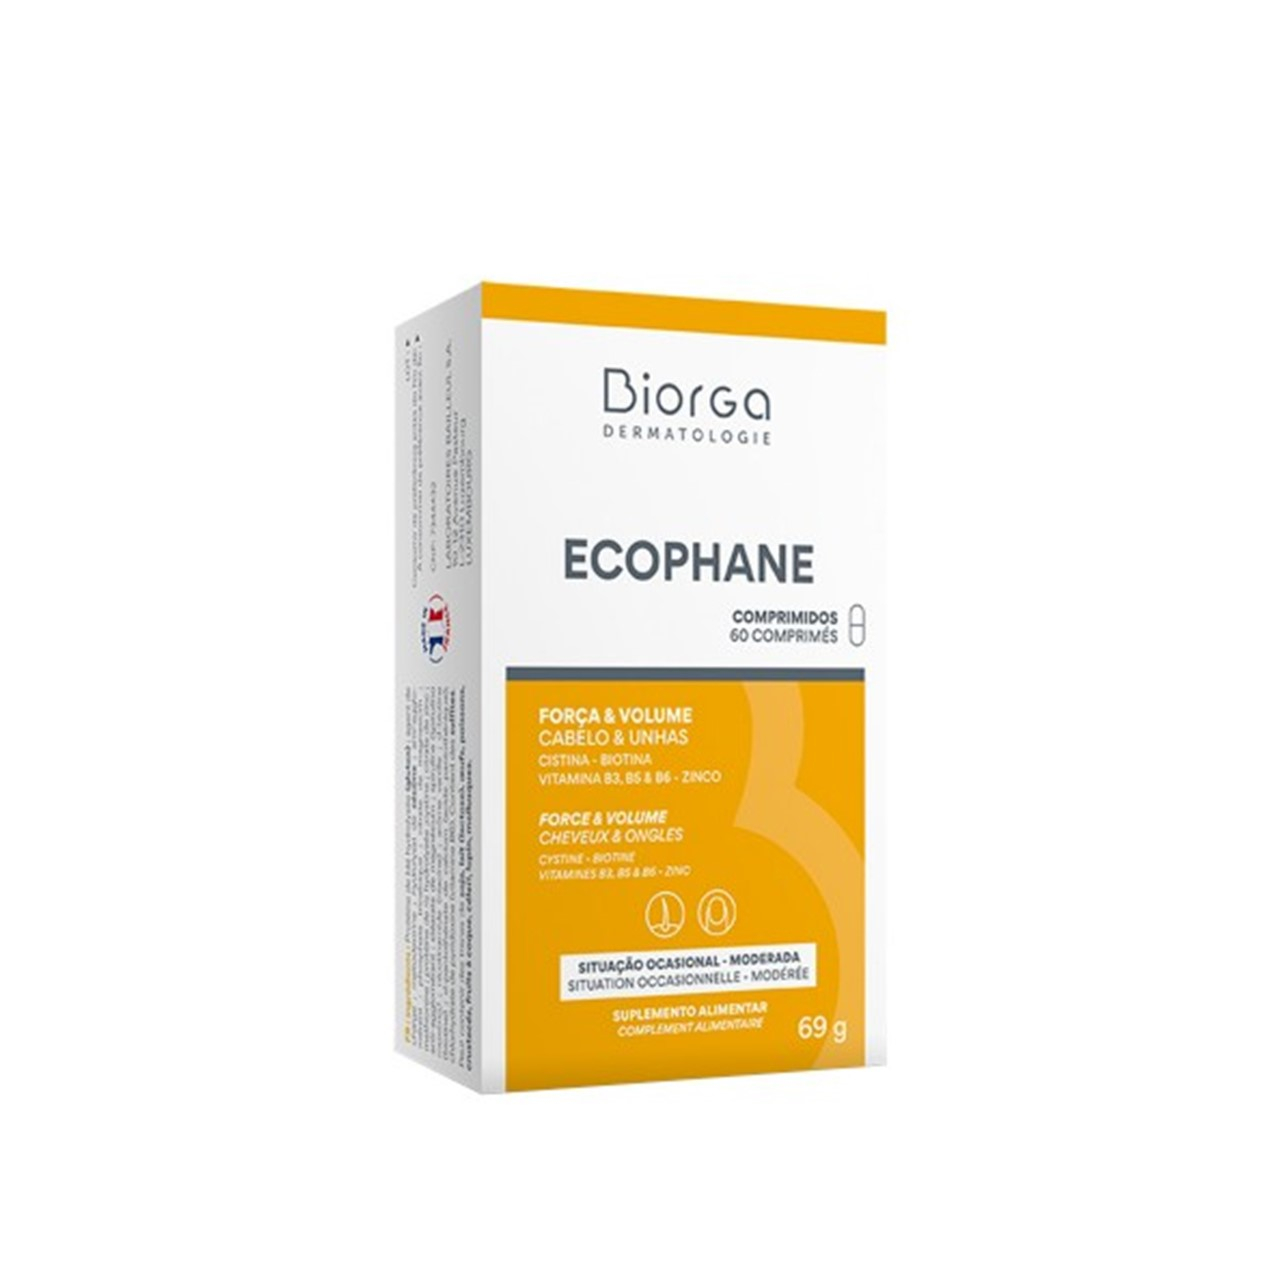 ECOPHANE Fortifying Tablets